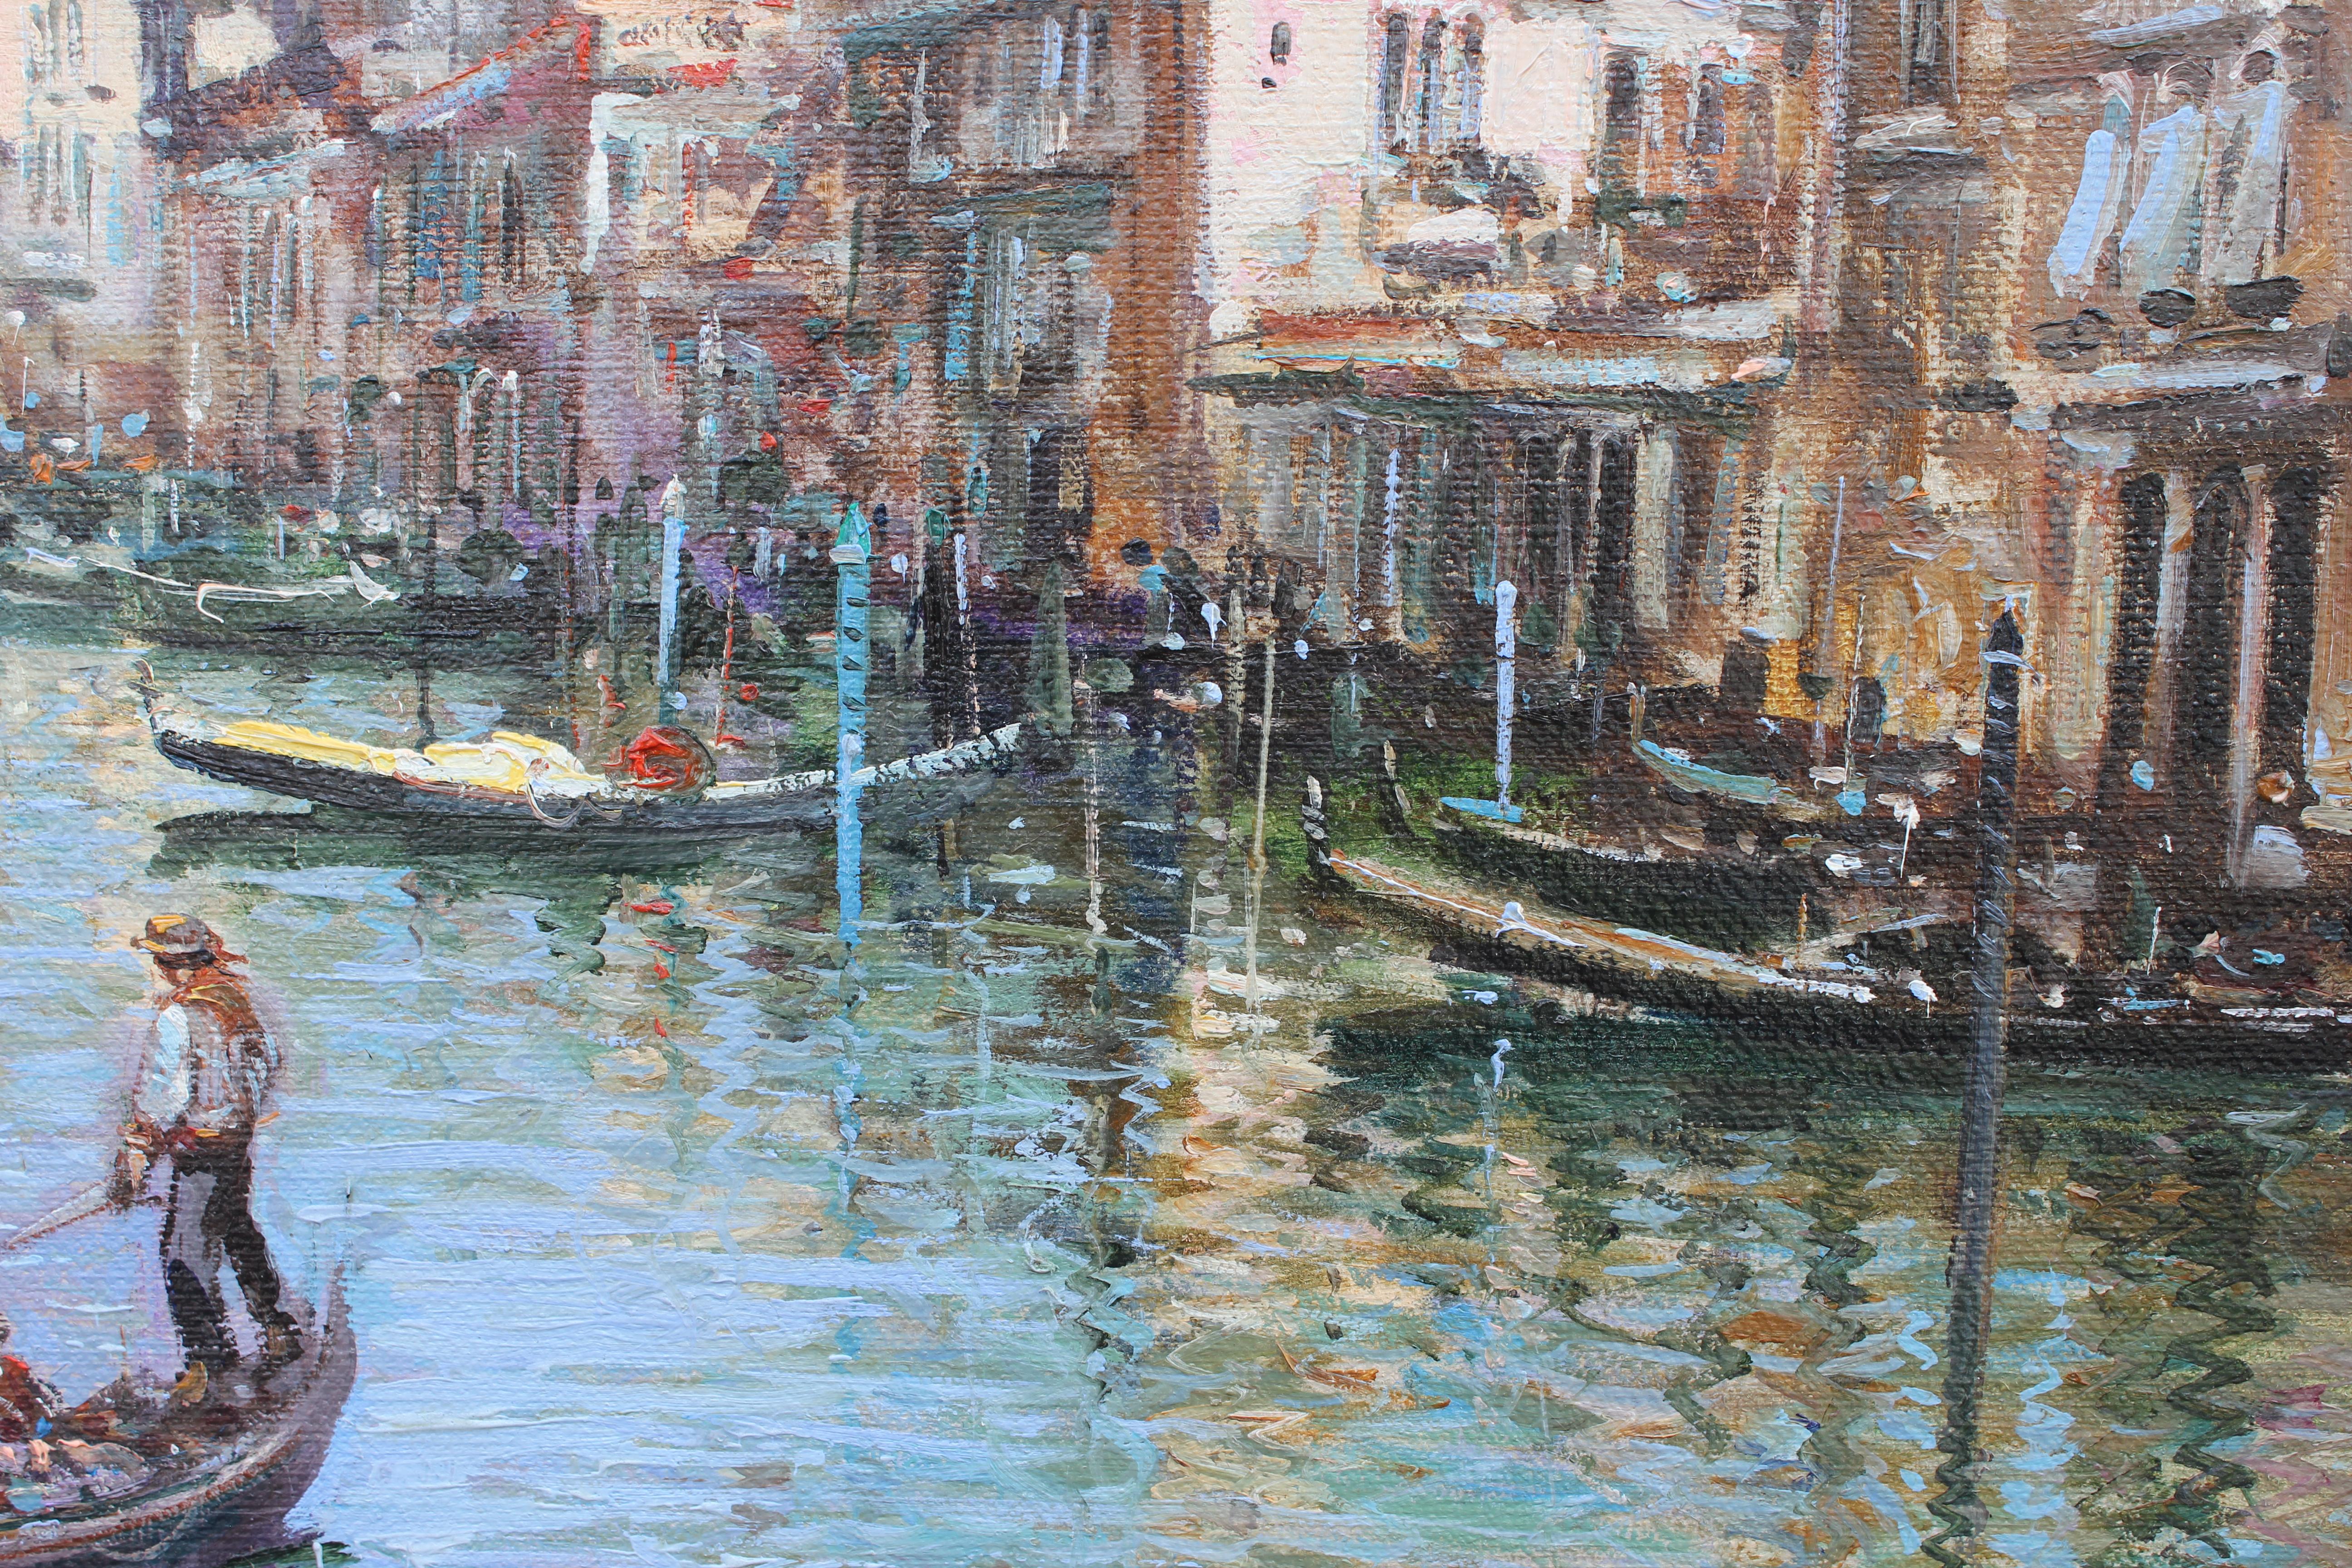 View of Venice Canal - Painting by Ciro Canzanella